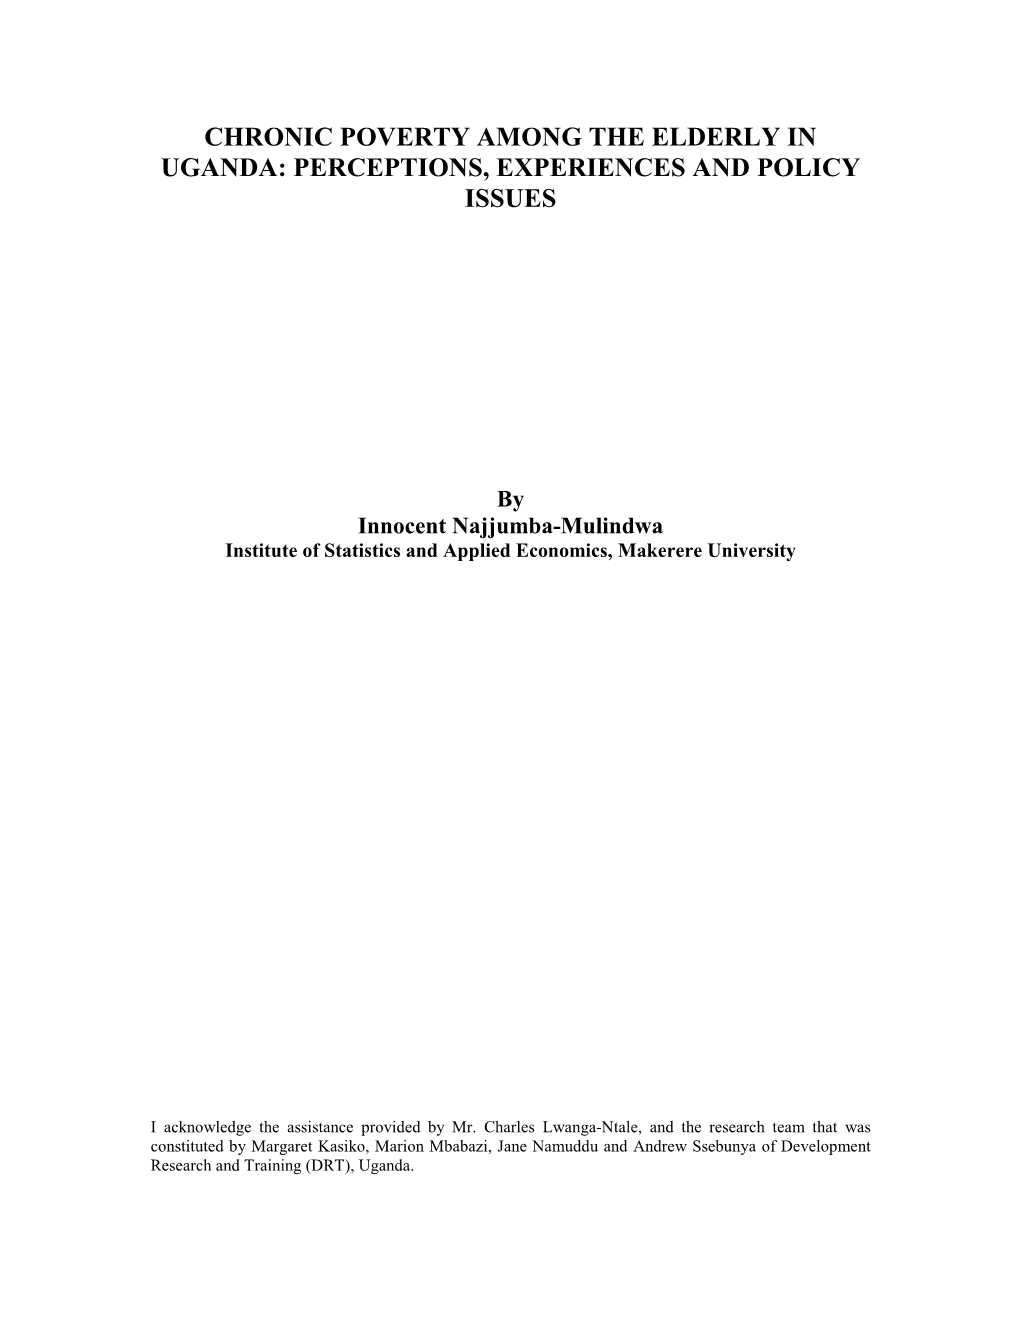 Chronic Poverty Among the Elderly in Uganda: Perceptions, Experiences and Policy Issues